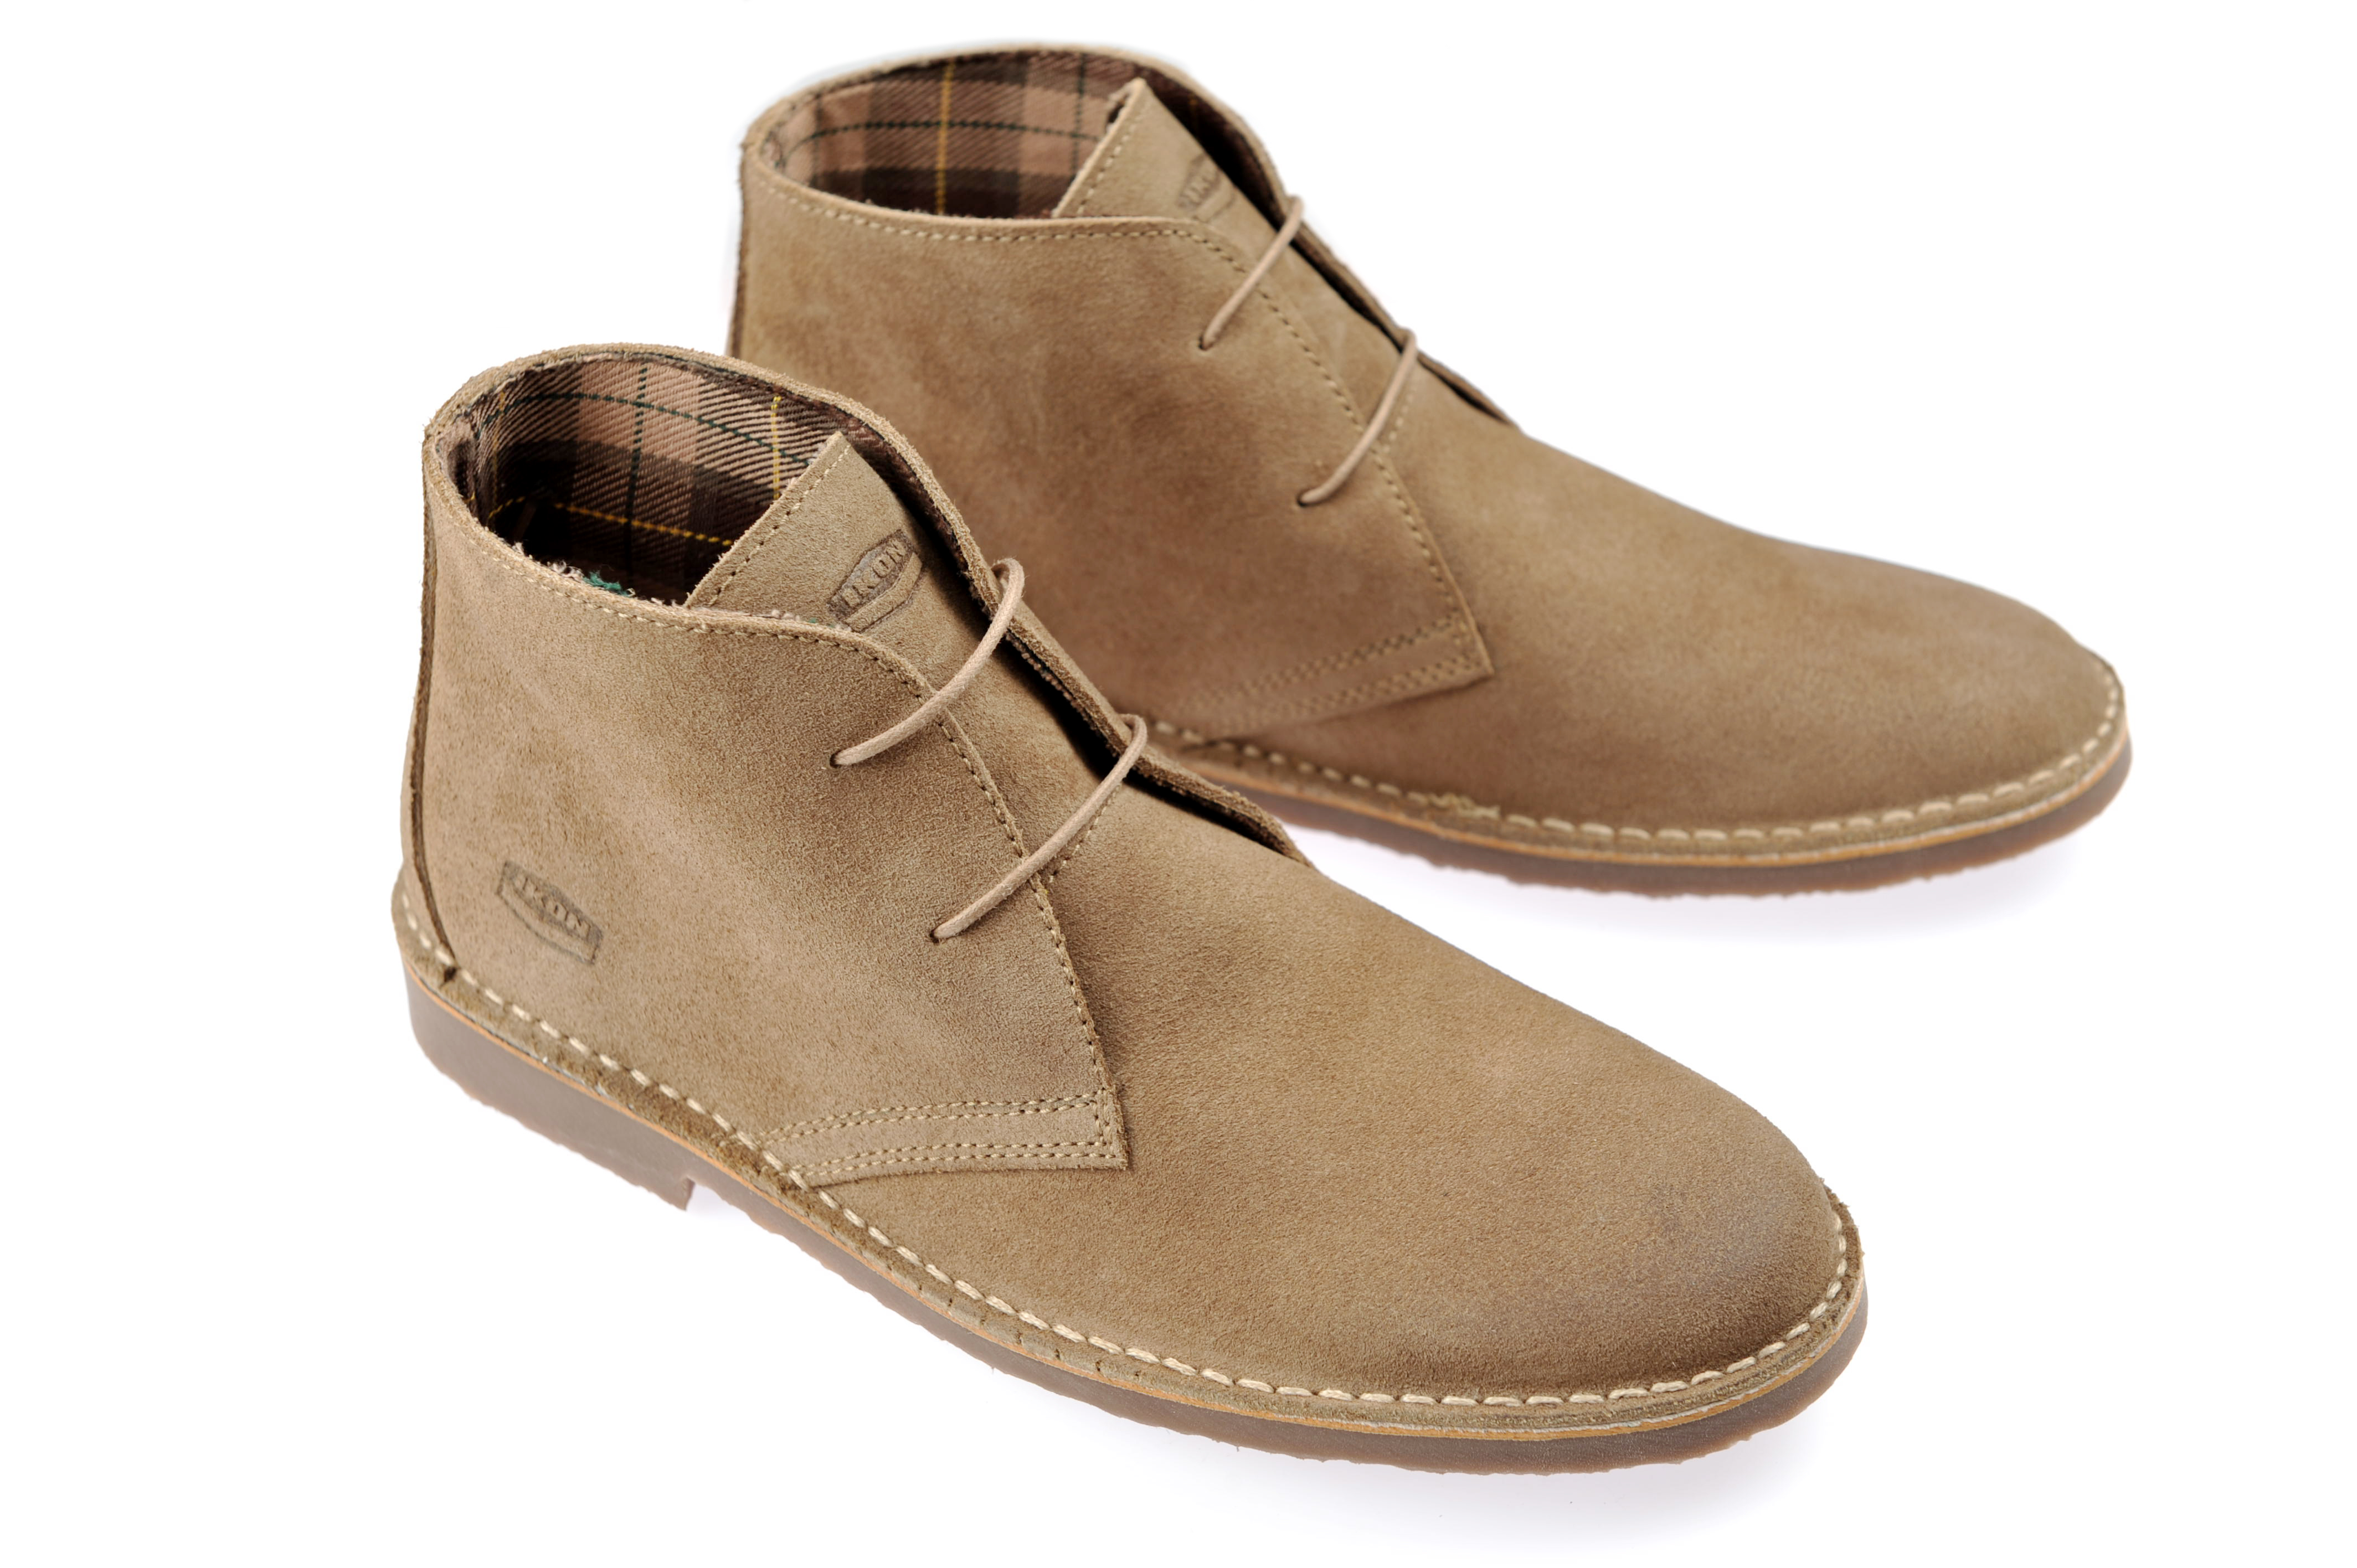 Love or hate? Desert boots